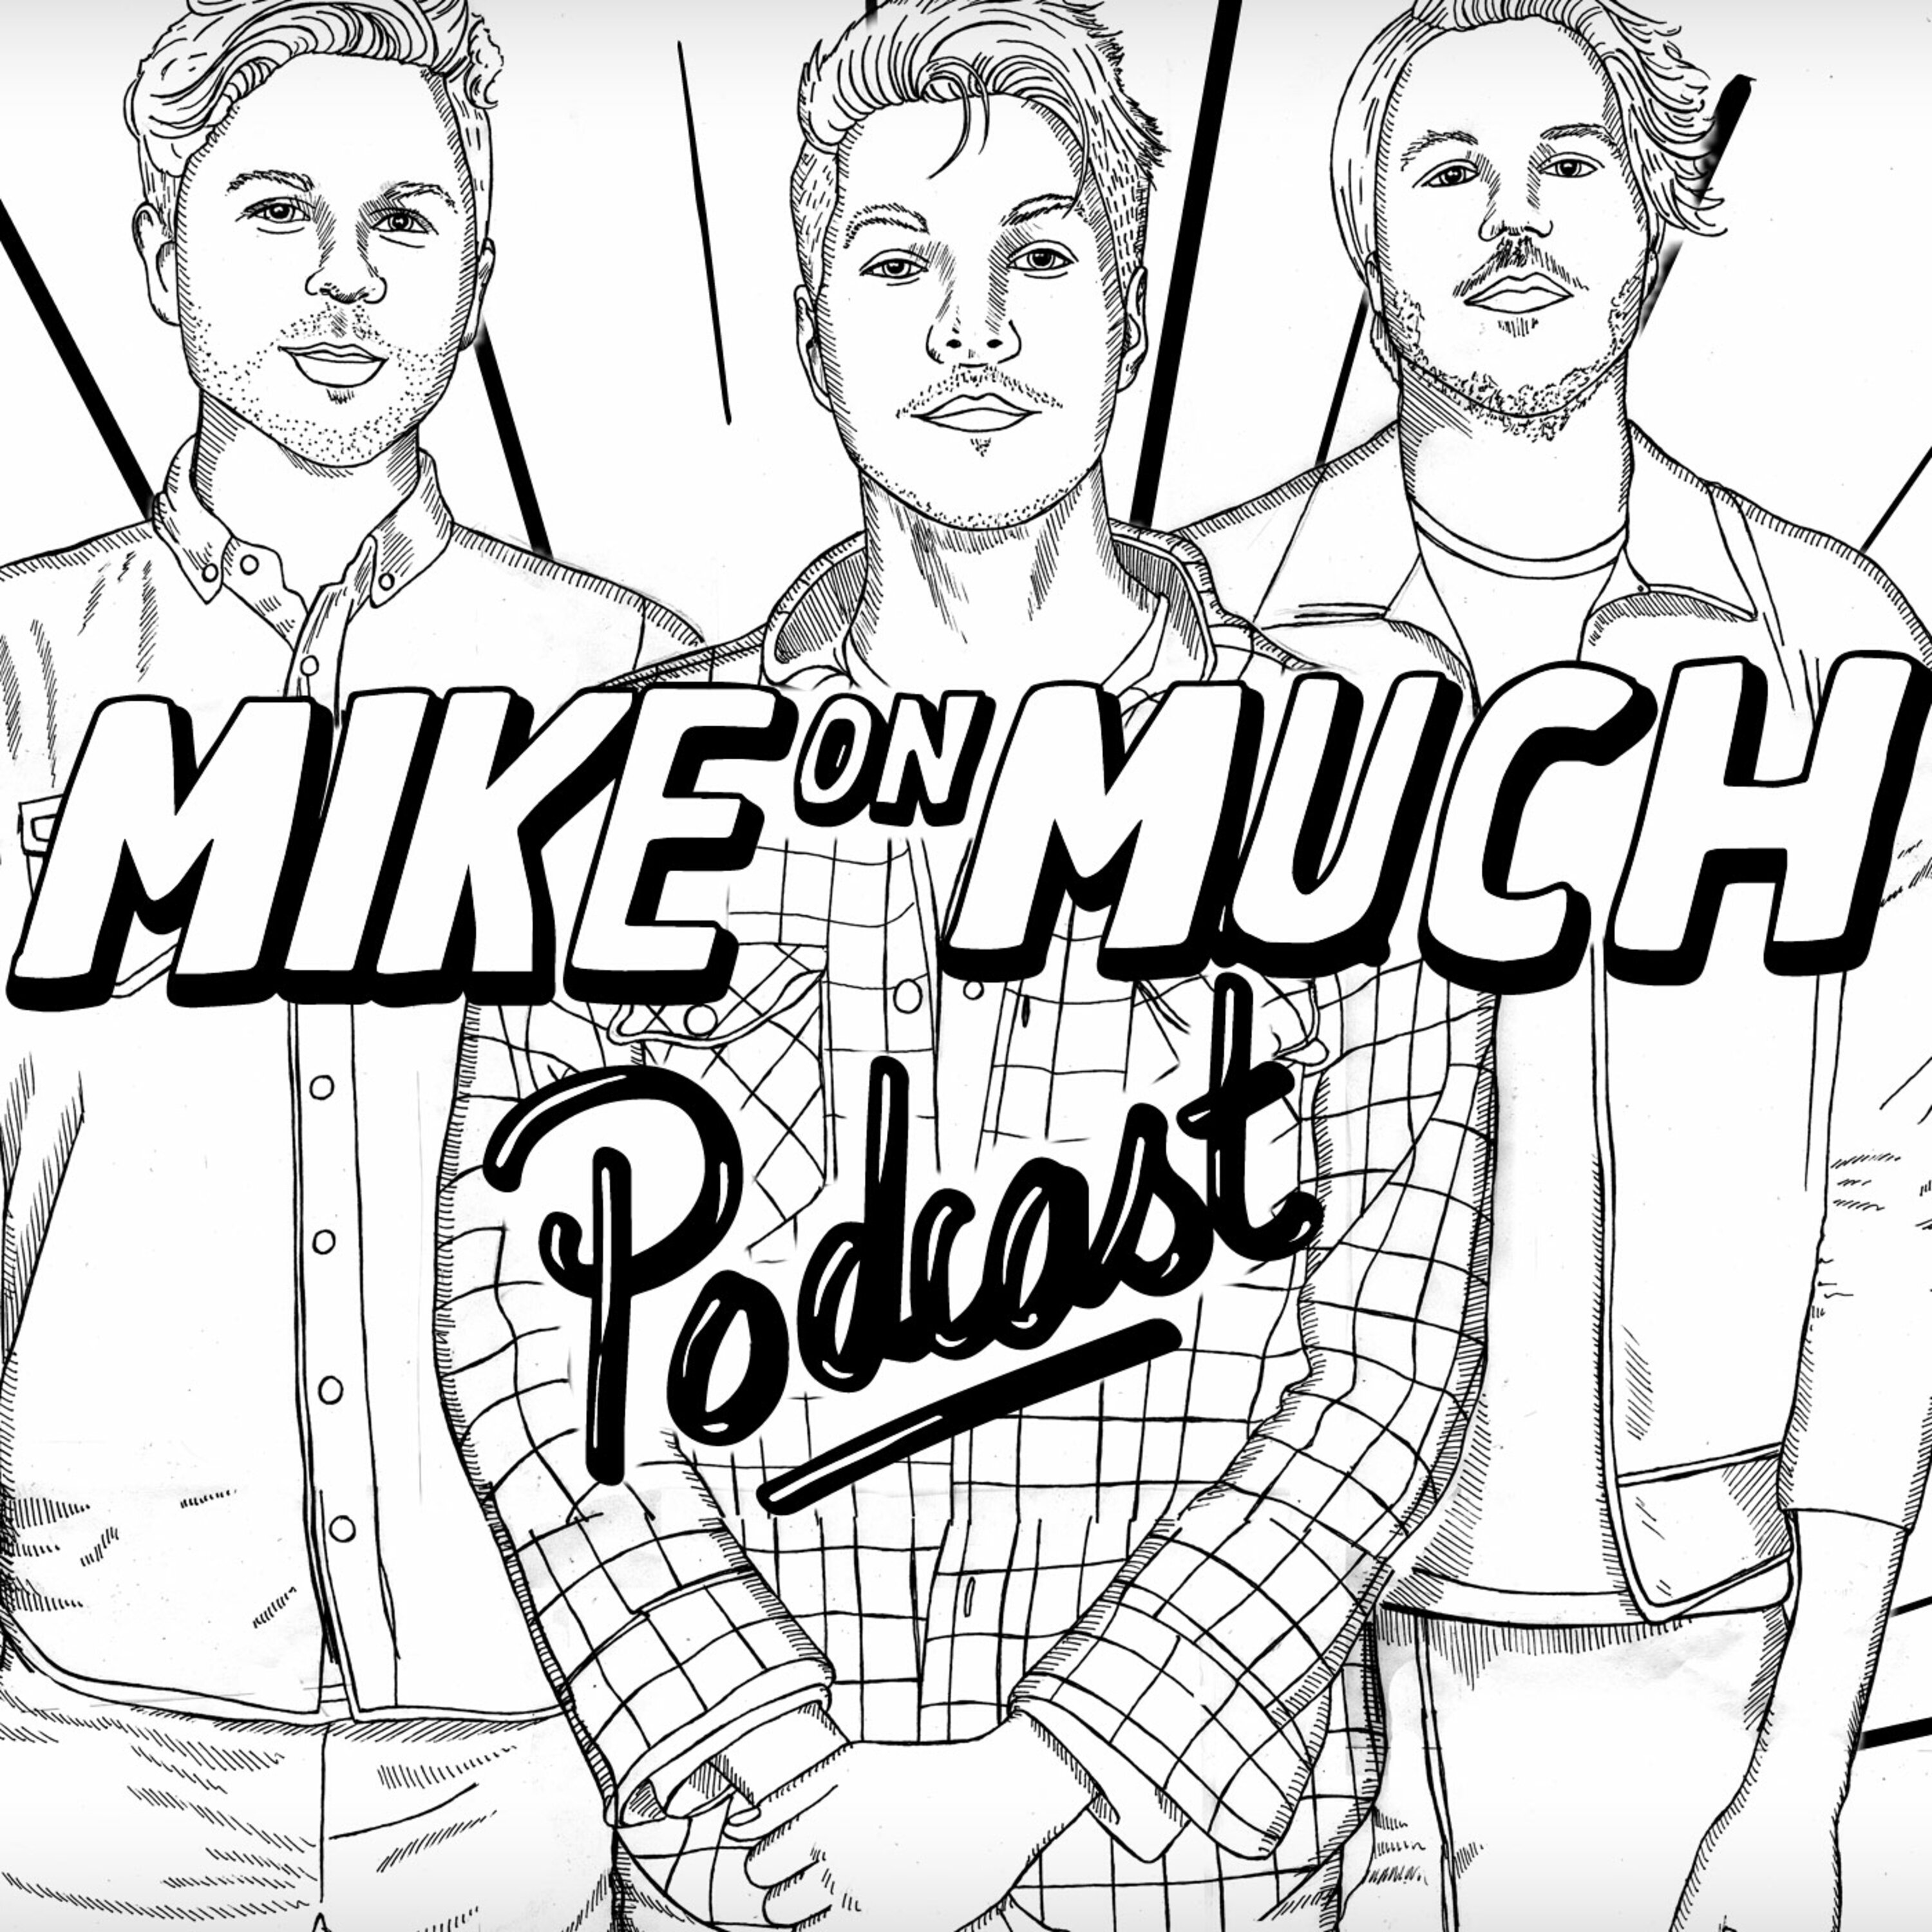 Season 1 Mike On Much: “The 2nd Best 6th Album in History”